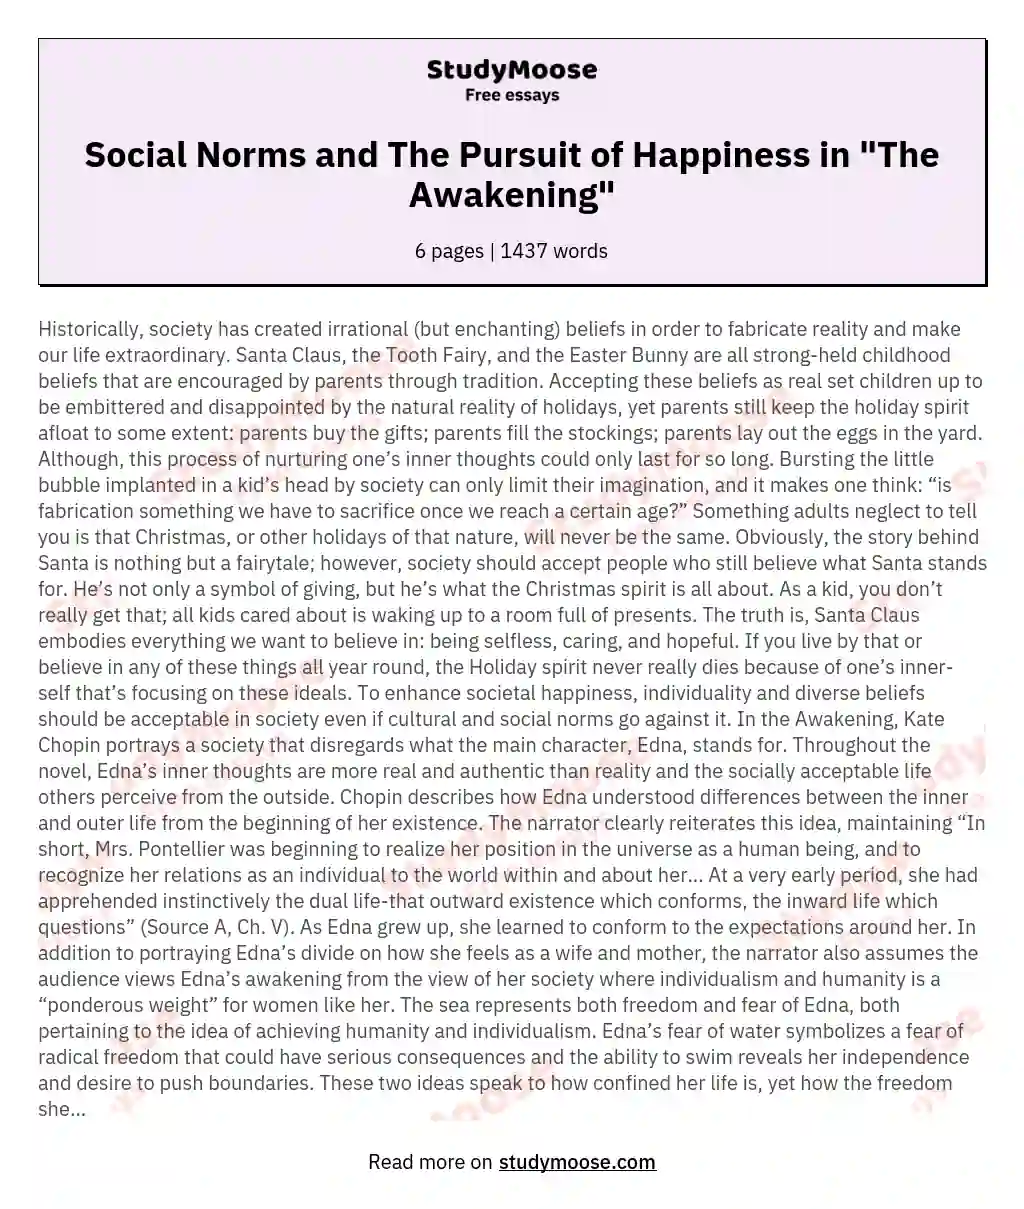 Social Norms and The Pursuit of Happiness in "The Awakening"